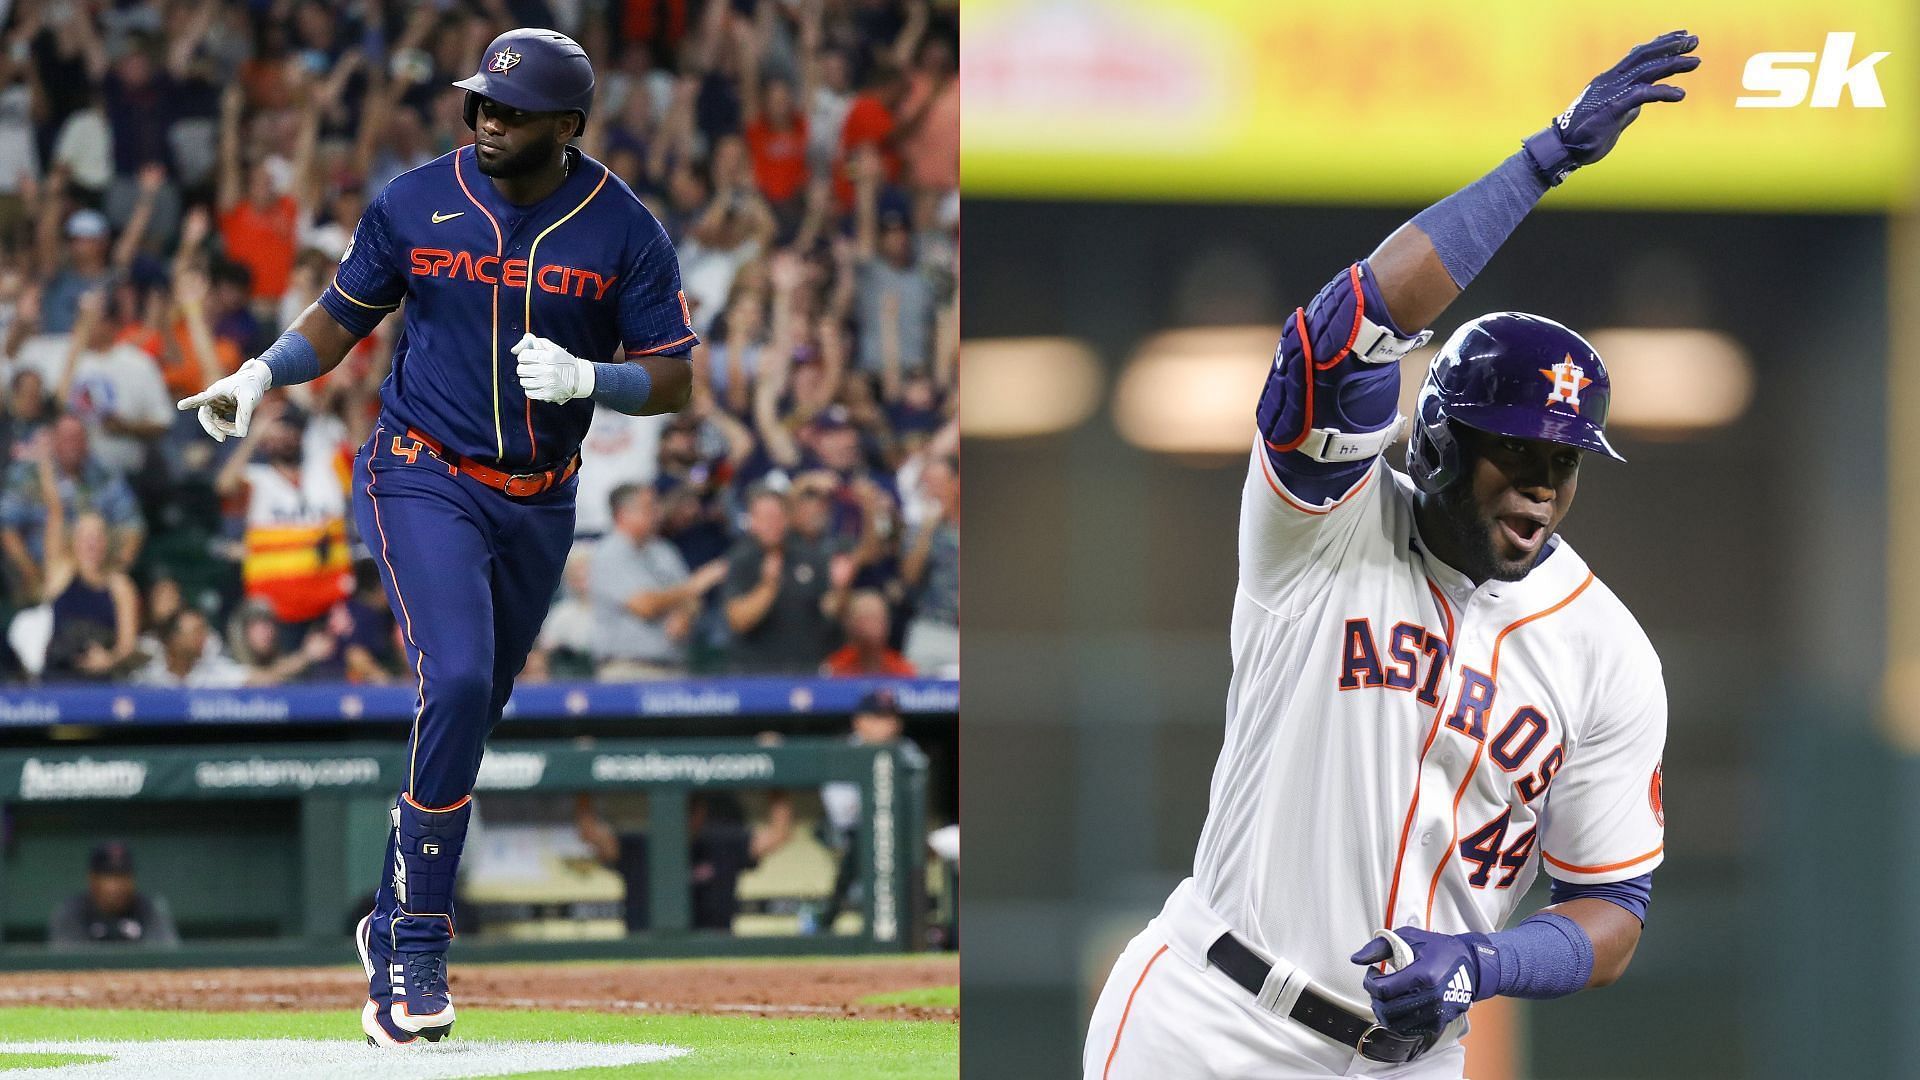 Every team in MLB playoffs has a least one former Astros player